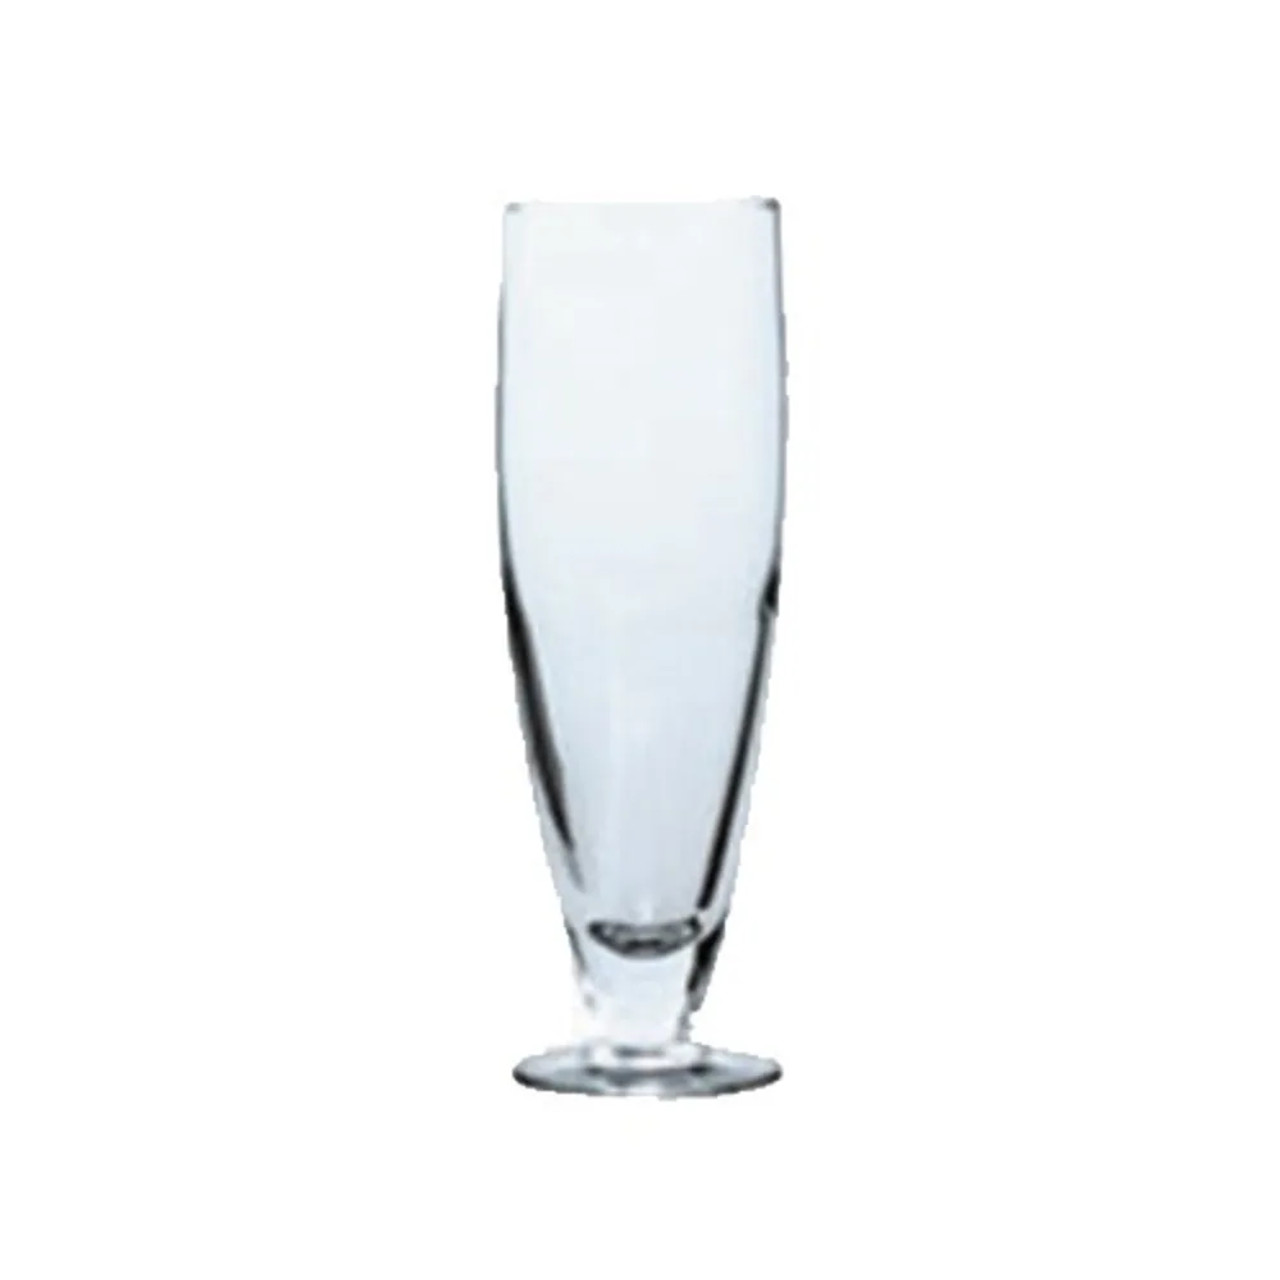 Arcoroc D0129 15 oz Specialty Pilsner Glass - High-Quality Glass (24/Case) - Chicken Pieces